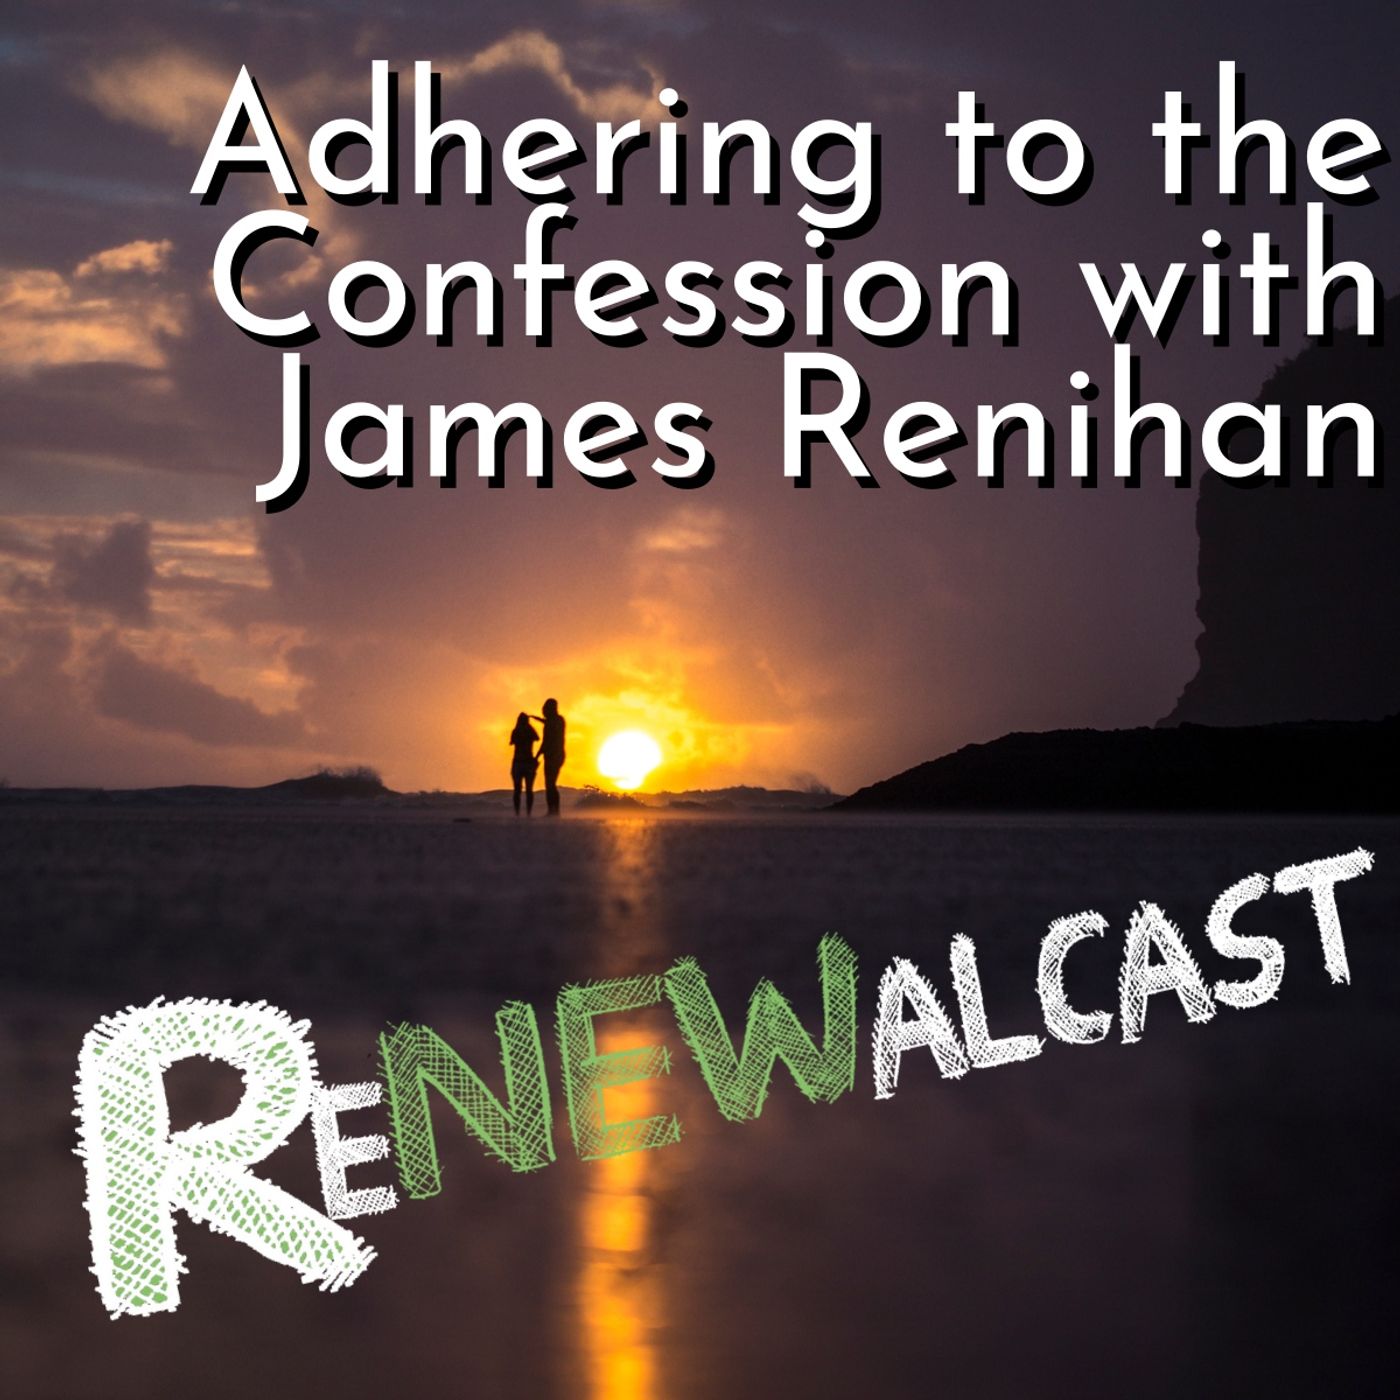 Adhering to the Confession with James Renihan